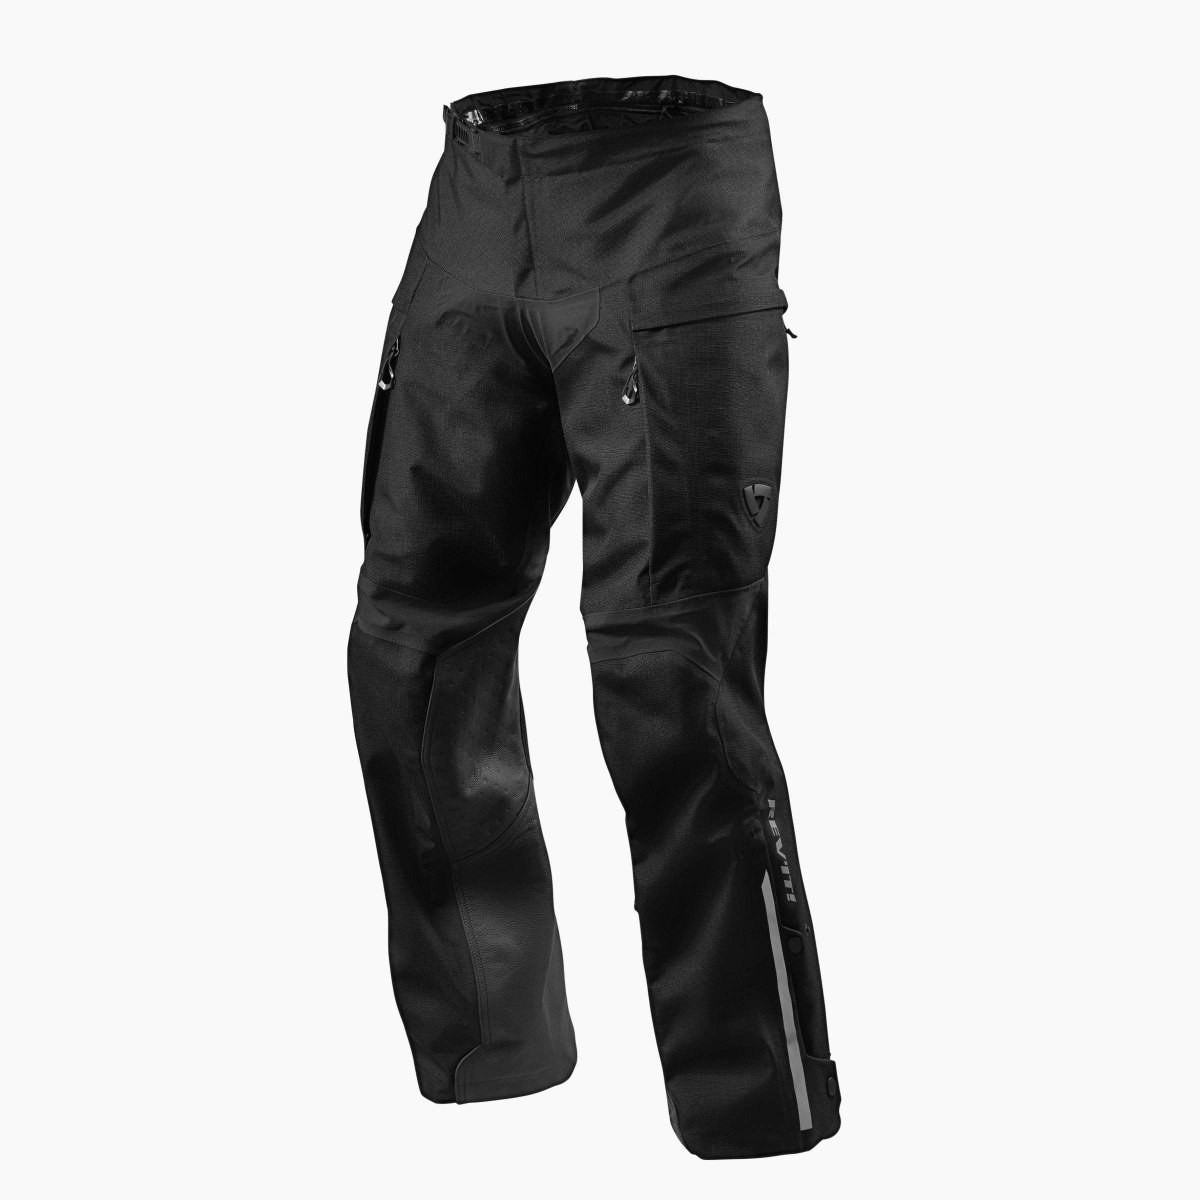 Image of REV'IT! Component H2O Short Black Motorcycle Pants Size 2XL ID 8700001317757